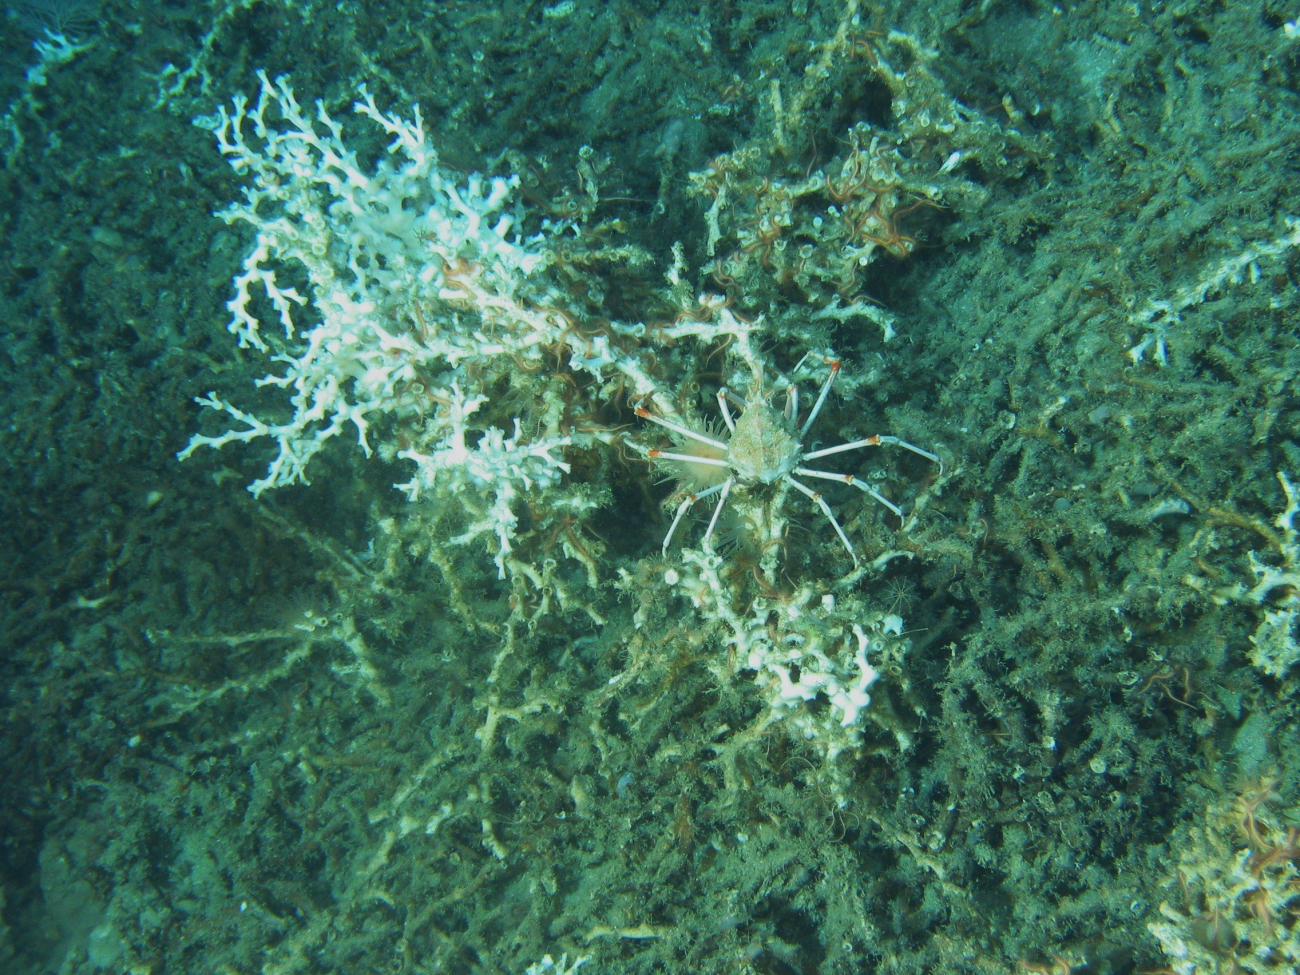 A lophelia bush with a large majid crab and numerous small brittle stars